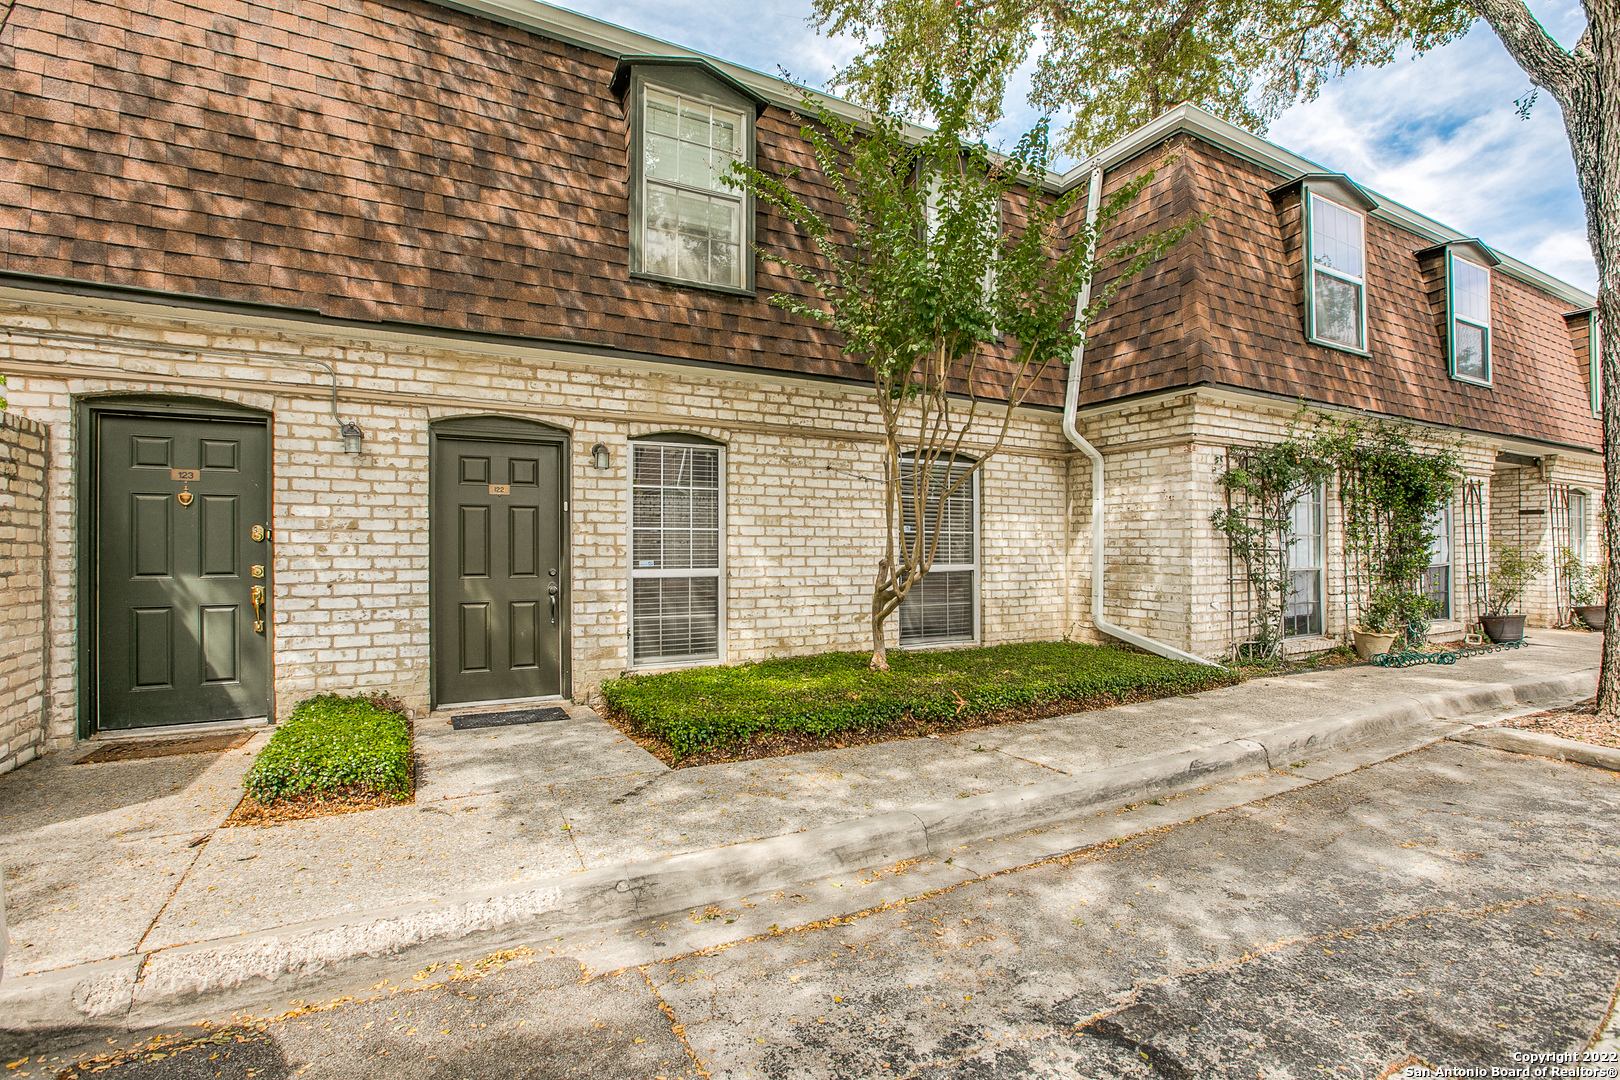 Recently and meticulously remodeled,this 2 bed, 2 bath single-story, ground-floor condo unit in Olmos Park Gardens has +/- 1090 square feet and is part of a 68-unit, well-established enclave community in Alamo Heights ISD! Just off Olmos Drive and situated among majestic oak trees, this unit is move-in ready with great modern features including granite countertops, stainless steel appliances, new kitchen cabinets, flooring, fixtures, lighting and fresh interior paint.  The bedrooms are nicely sized, both with walk-in closets and private bathroom access.  There French doors off the living/dining area that lead to a quaint, private patio.  Your one covered parking spot is just outside the unit's side door.  The complex has a pool, clubhouse and is professionally managed.  It's San Antonio/AHISD condo living at its very best! Come see it today.